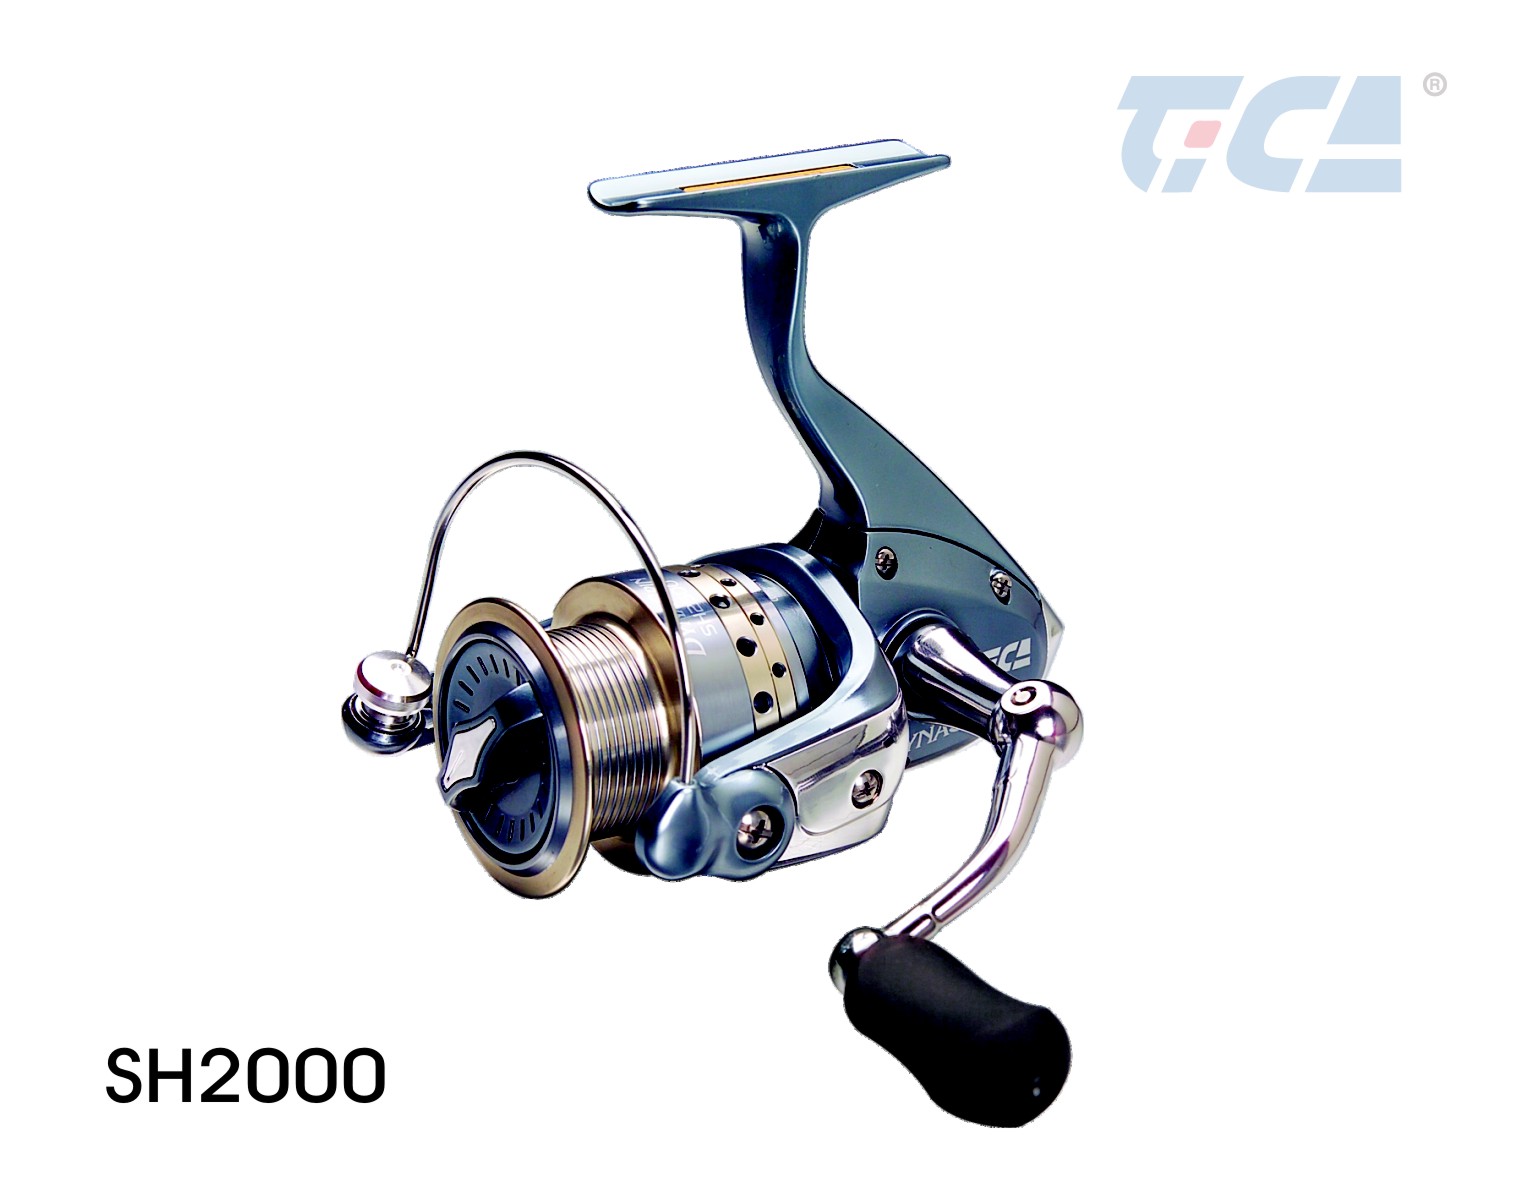 Tica Dynaspin Gh série 1500-4000 Spinning Reels 